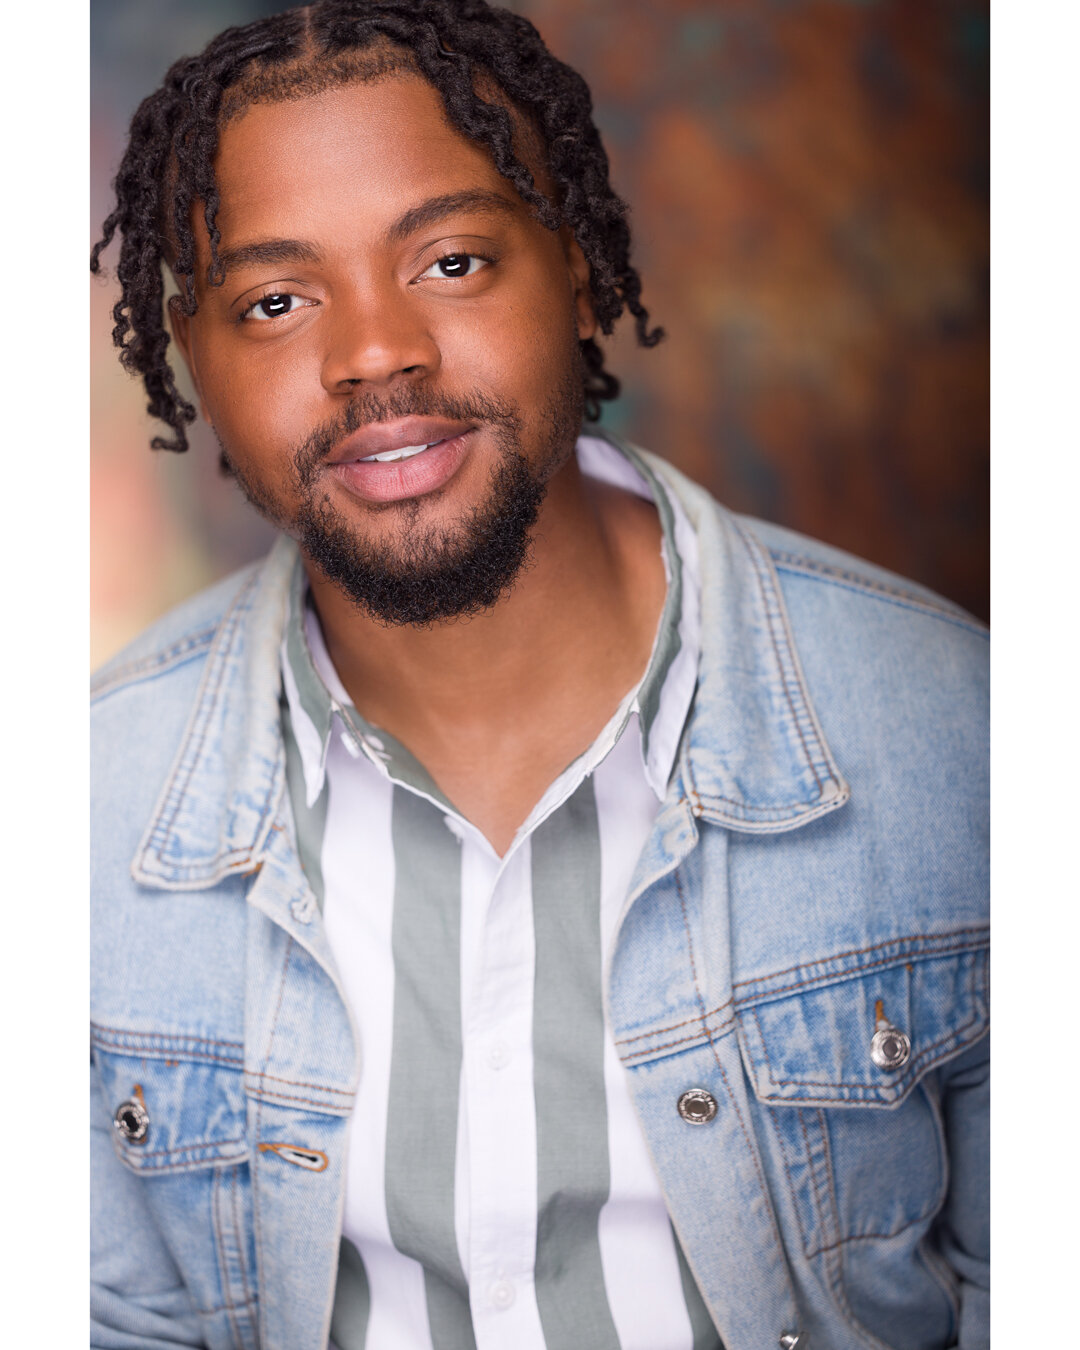 Let Me Help You Get In The Room! (or wherever you tape your auditions!)

Headshots for Actors &amp; Creatives
Los Angeles, California

BOOK YOUR SHOOT TODAY

ACTOR: @christiankamaal 
GROOMING: @nenethemakeupartist
www.photosbyjamaal.com

#headshots #